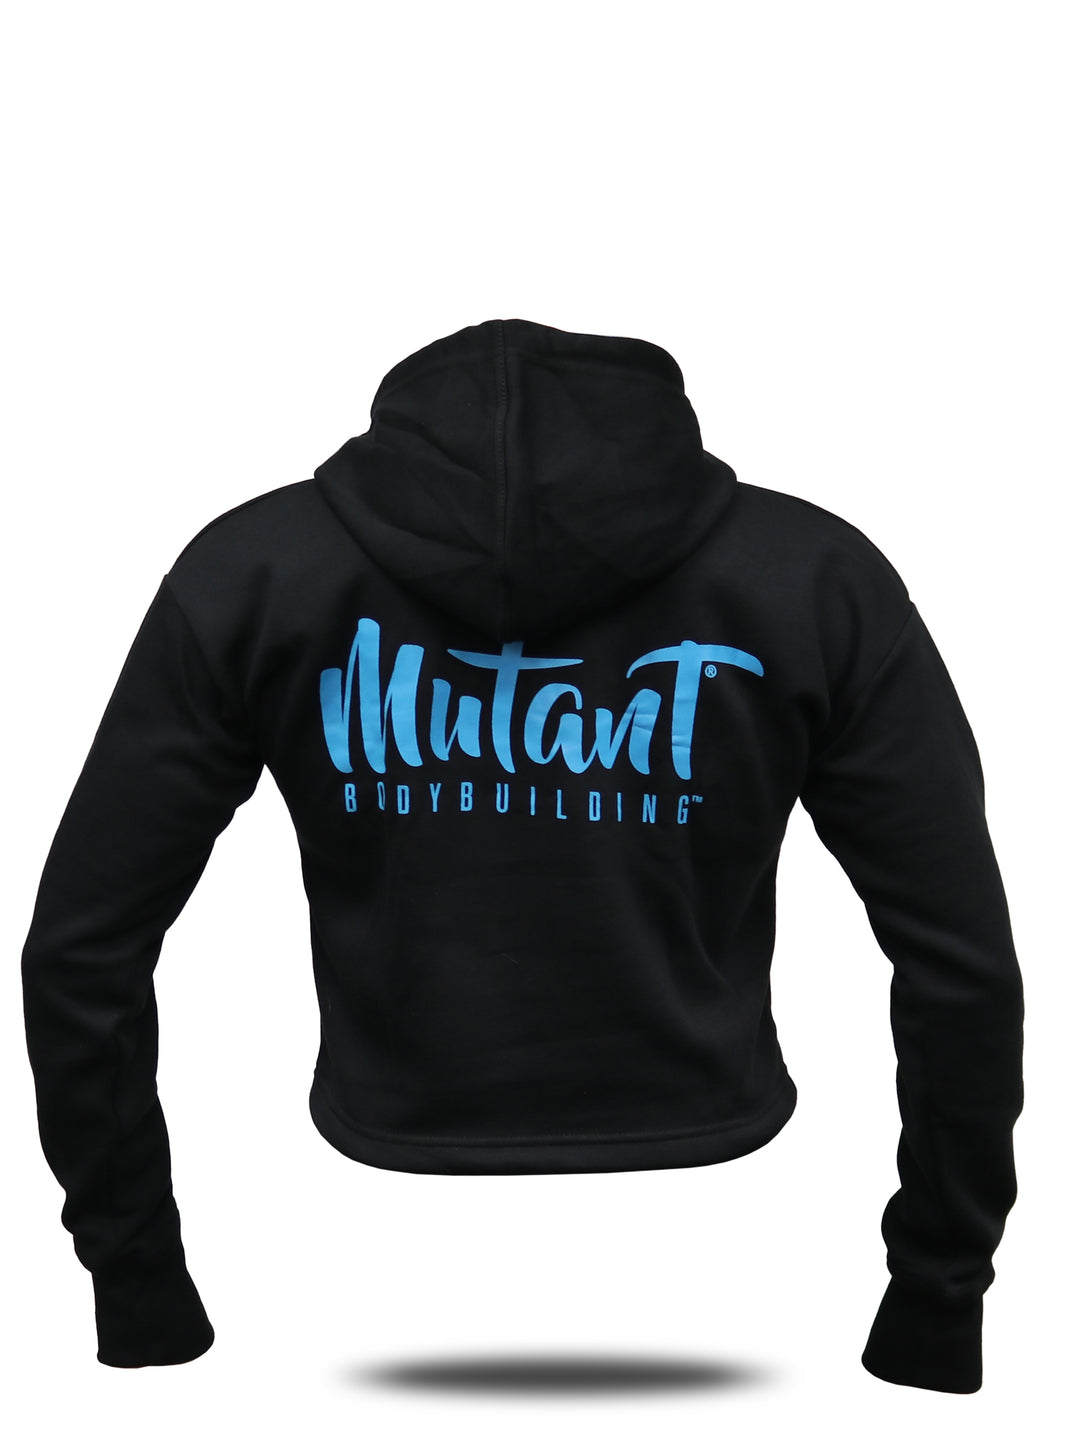 Black Mutant Thick Script Women's Gym Crop Hoodie with blue 'Mutant Bodybuilding' text on the back. White background.